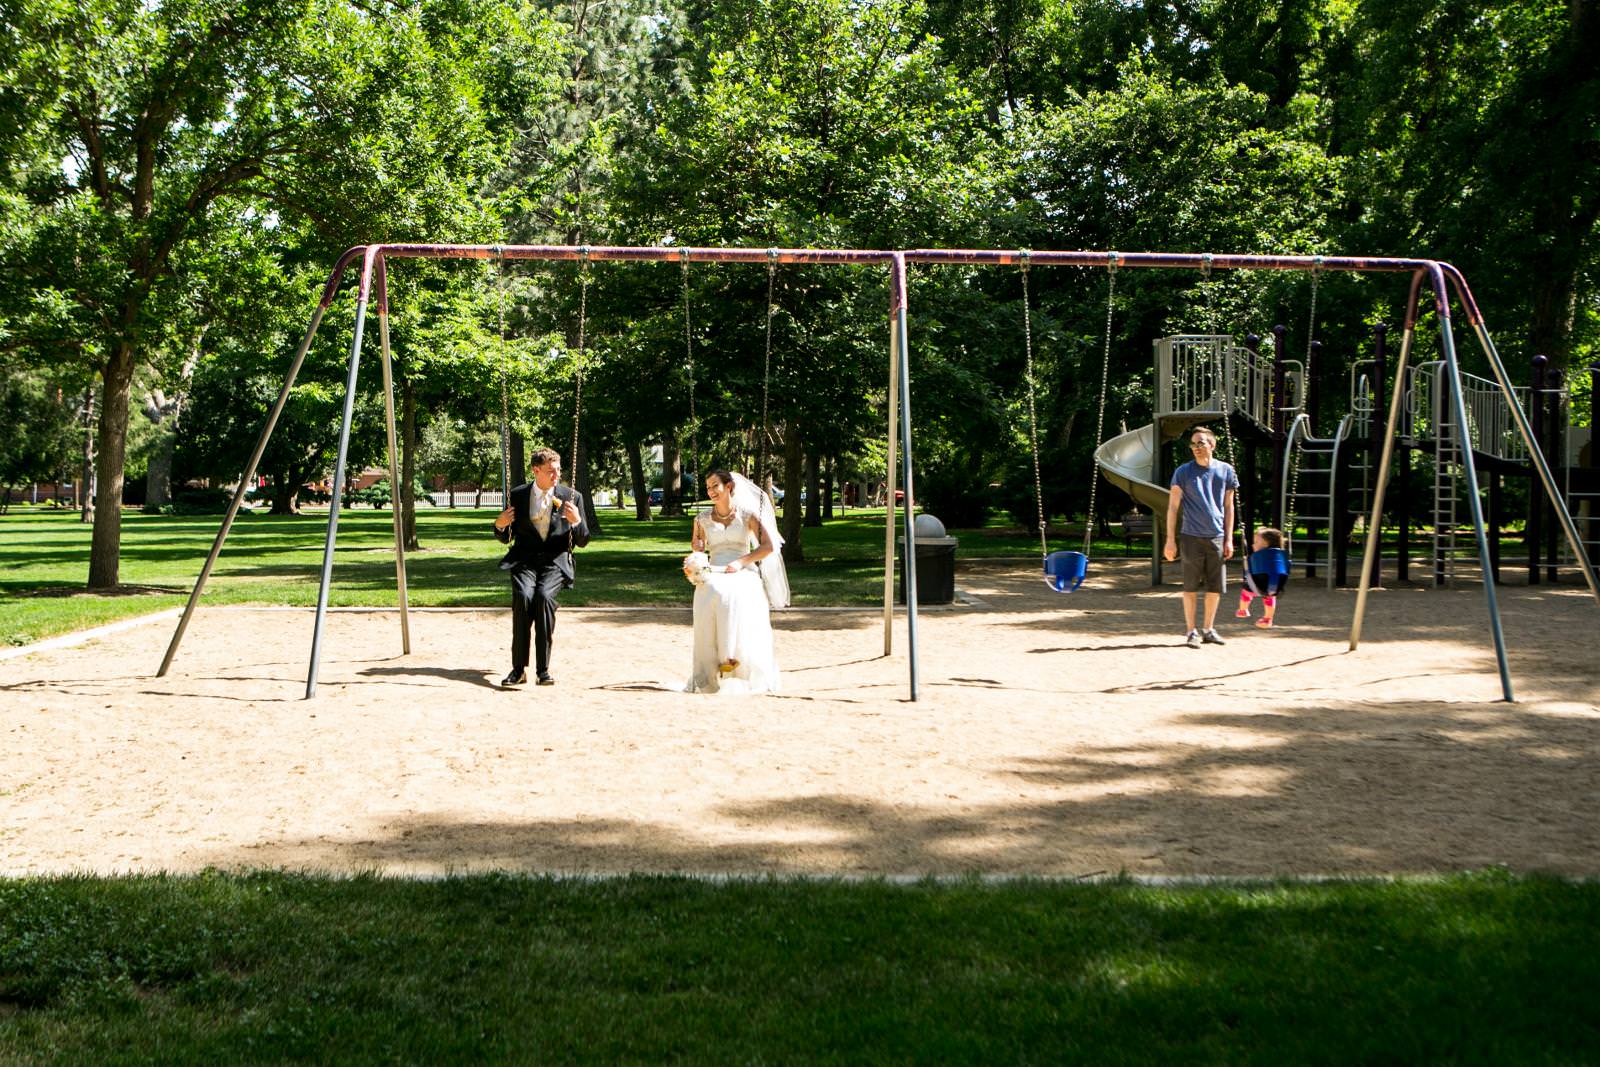 newlyweds riding swings at a park